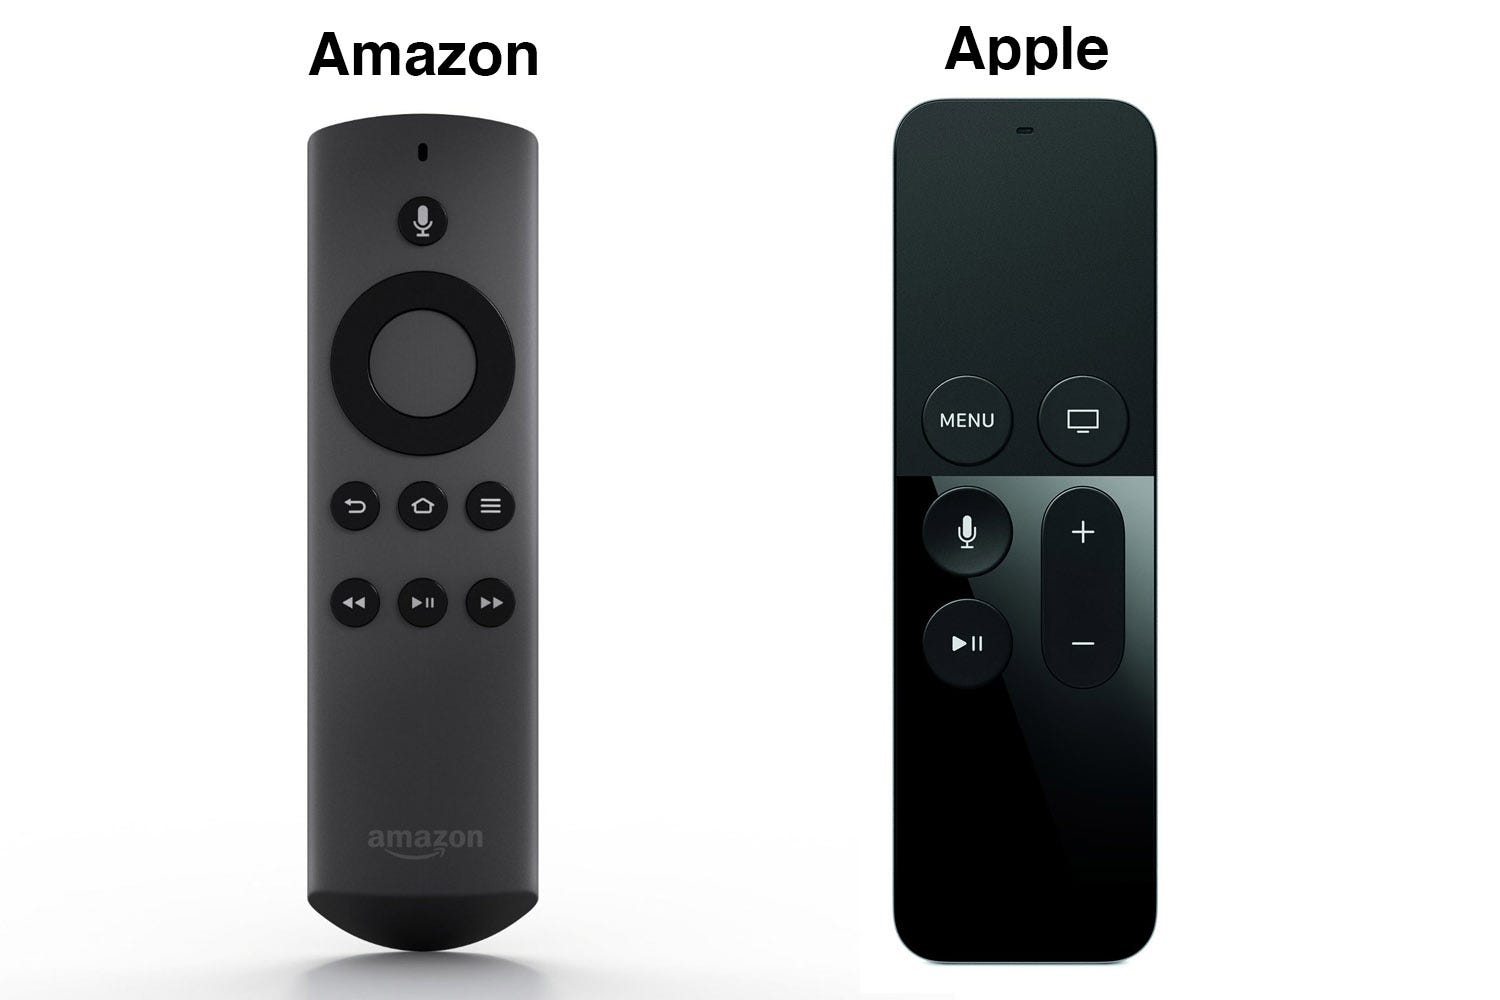 The new Apple TV remote could